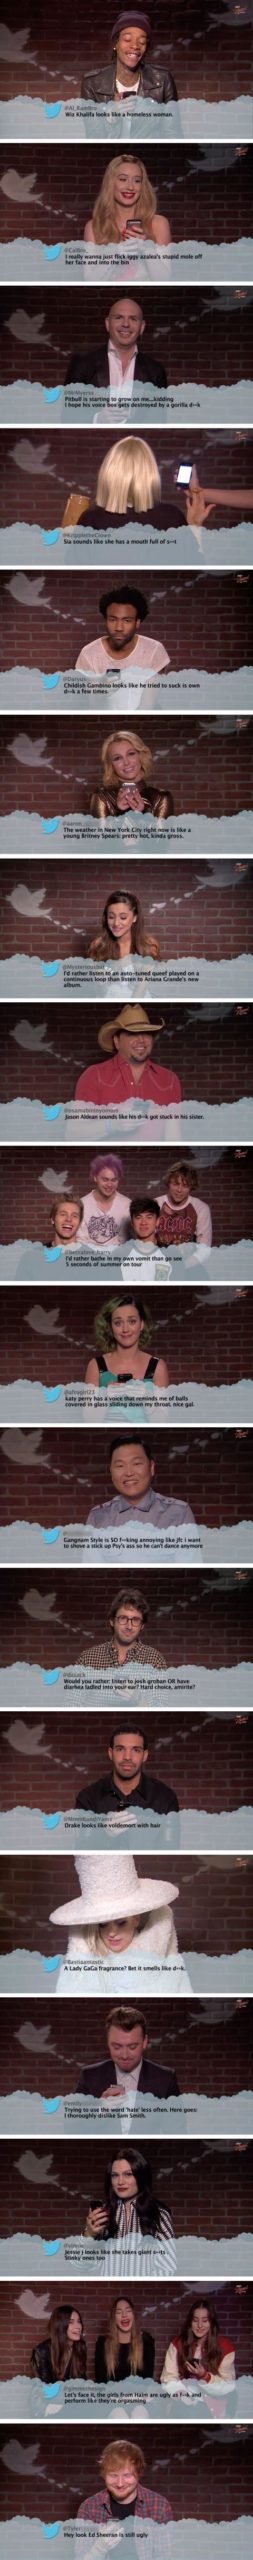 Celebrities+reading+mean+tweets+about+themselves